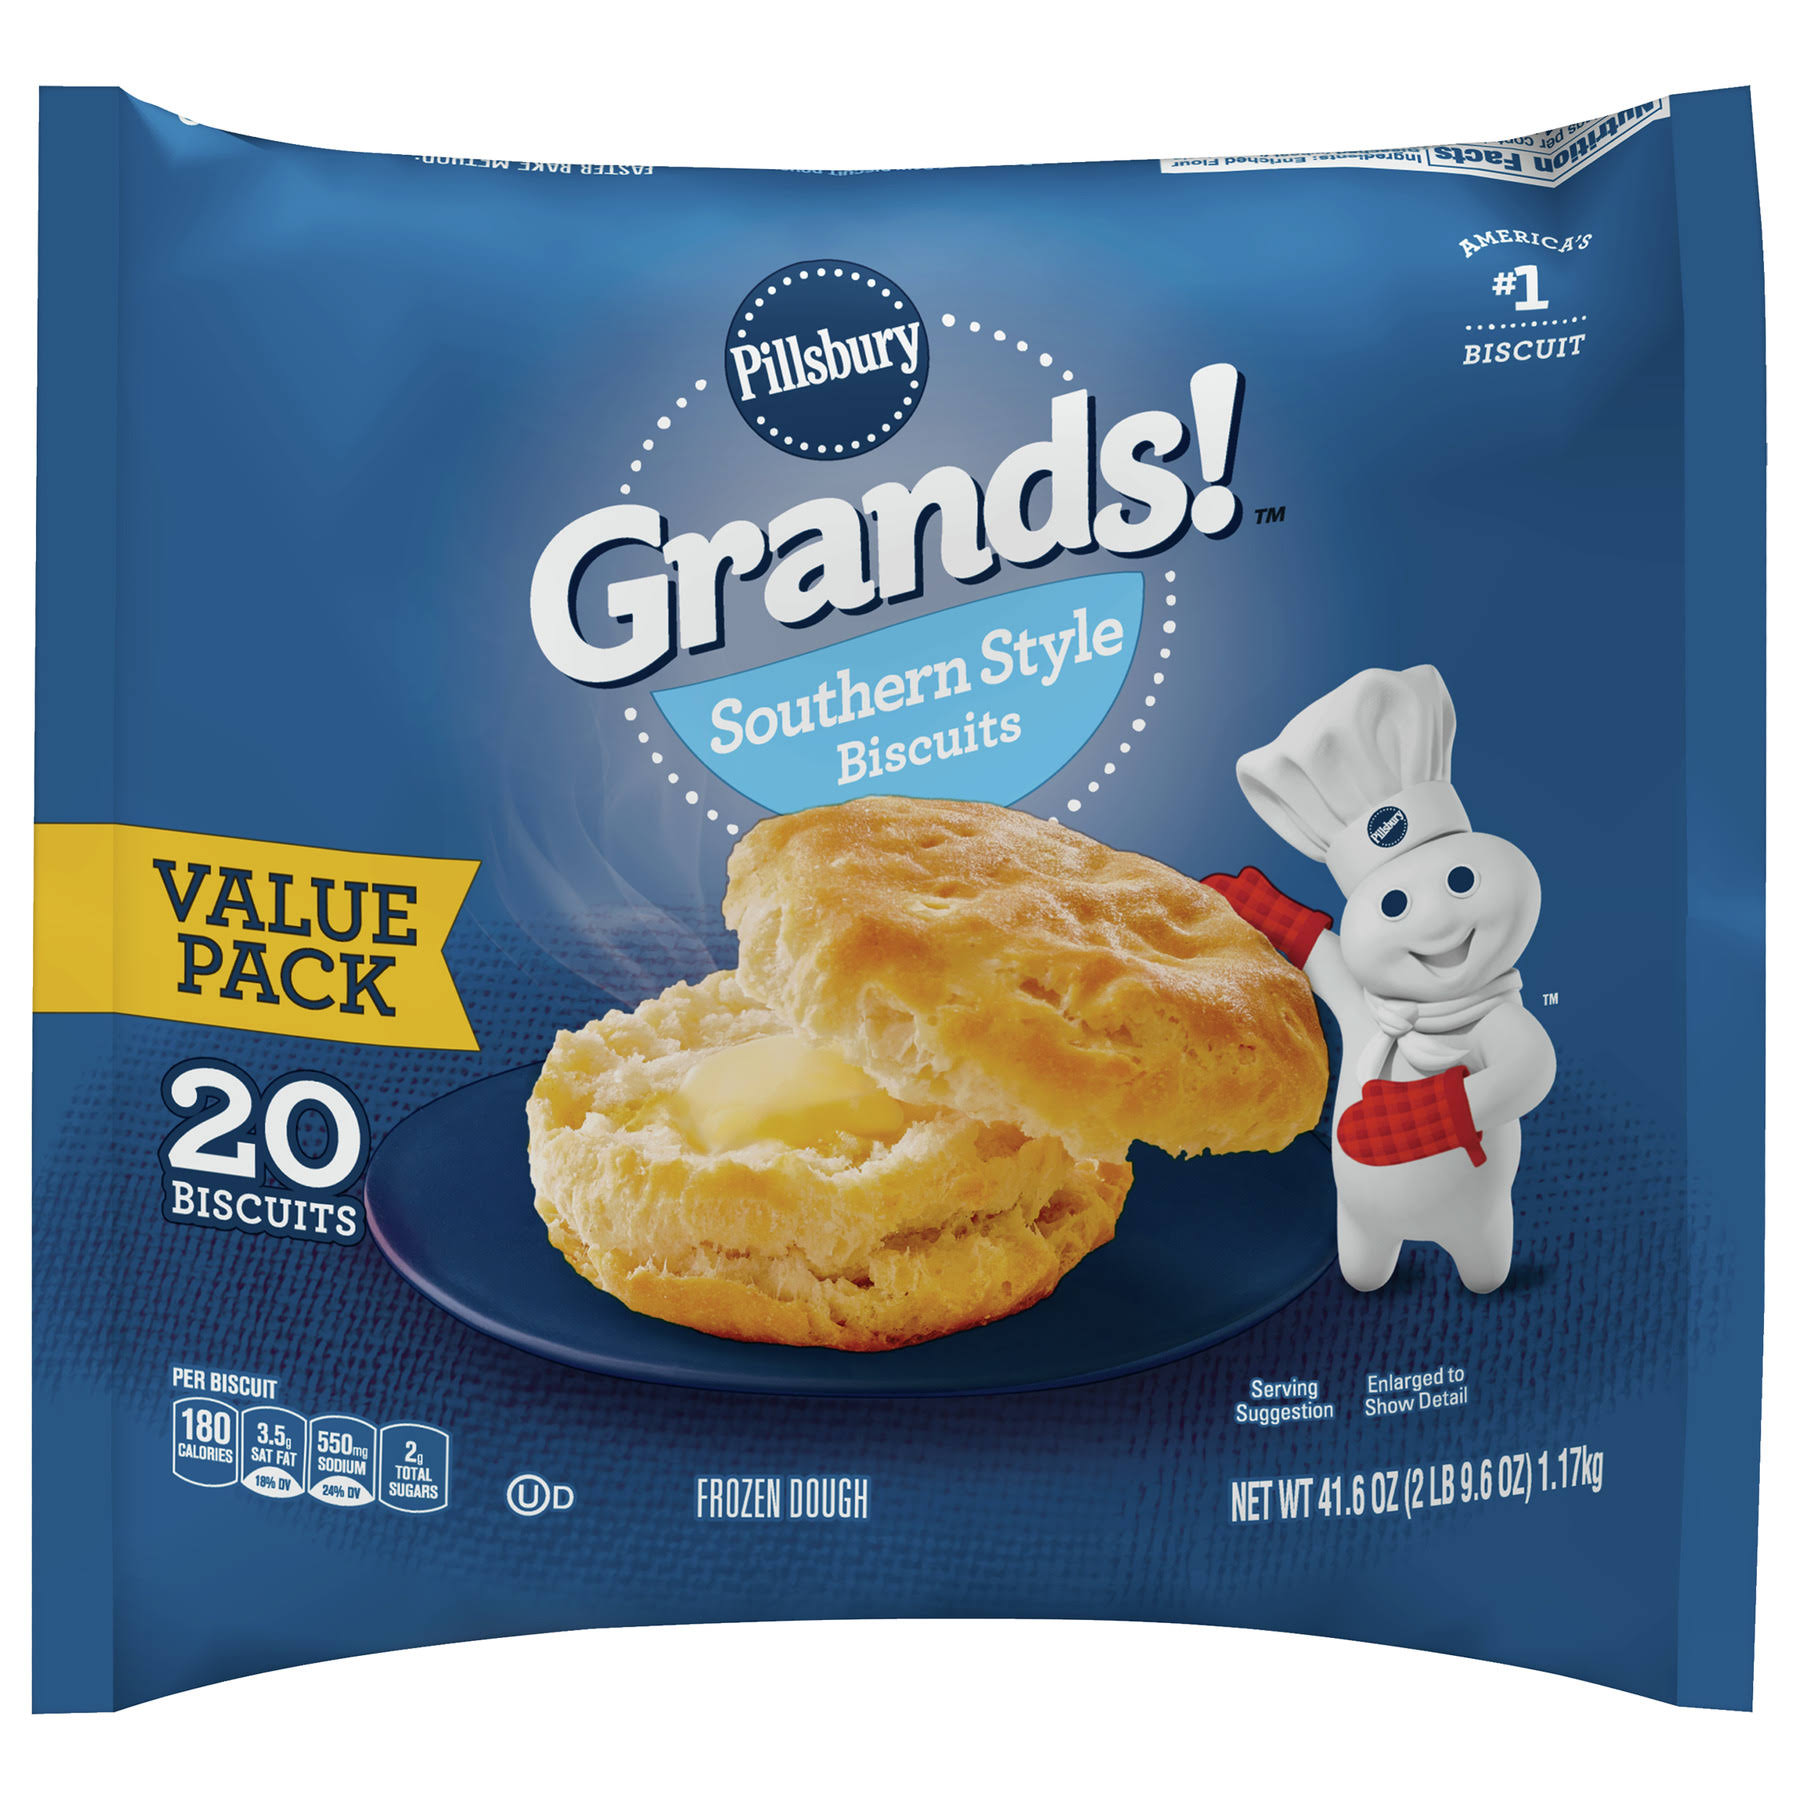 Pillsbury Grands! Southern Style Biscuits Value Pack - 20ct, 41.6oz